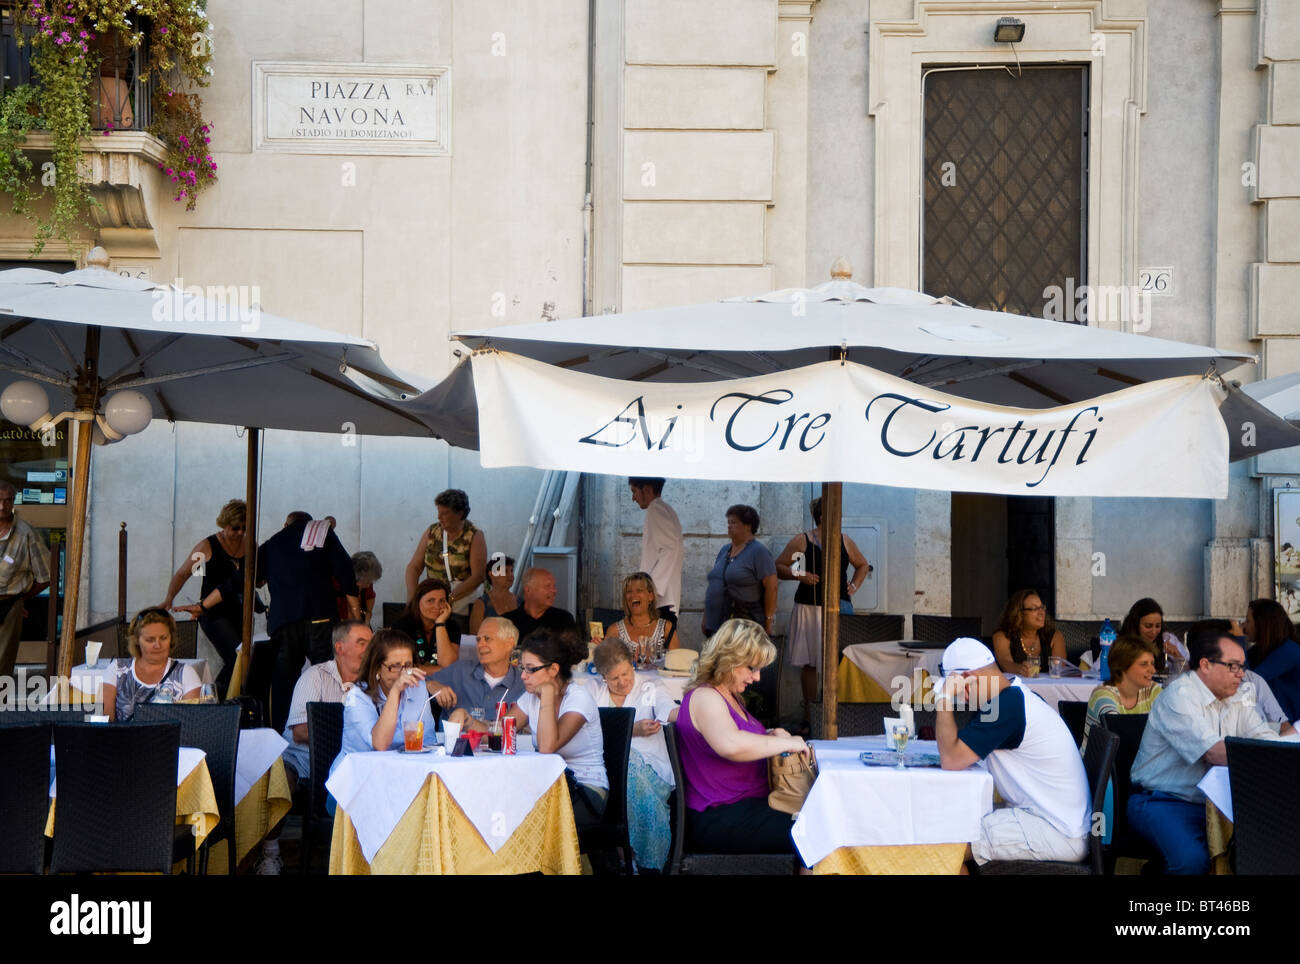 Cafe  in PIazza Navona, Rome, Italy Stock Photo